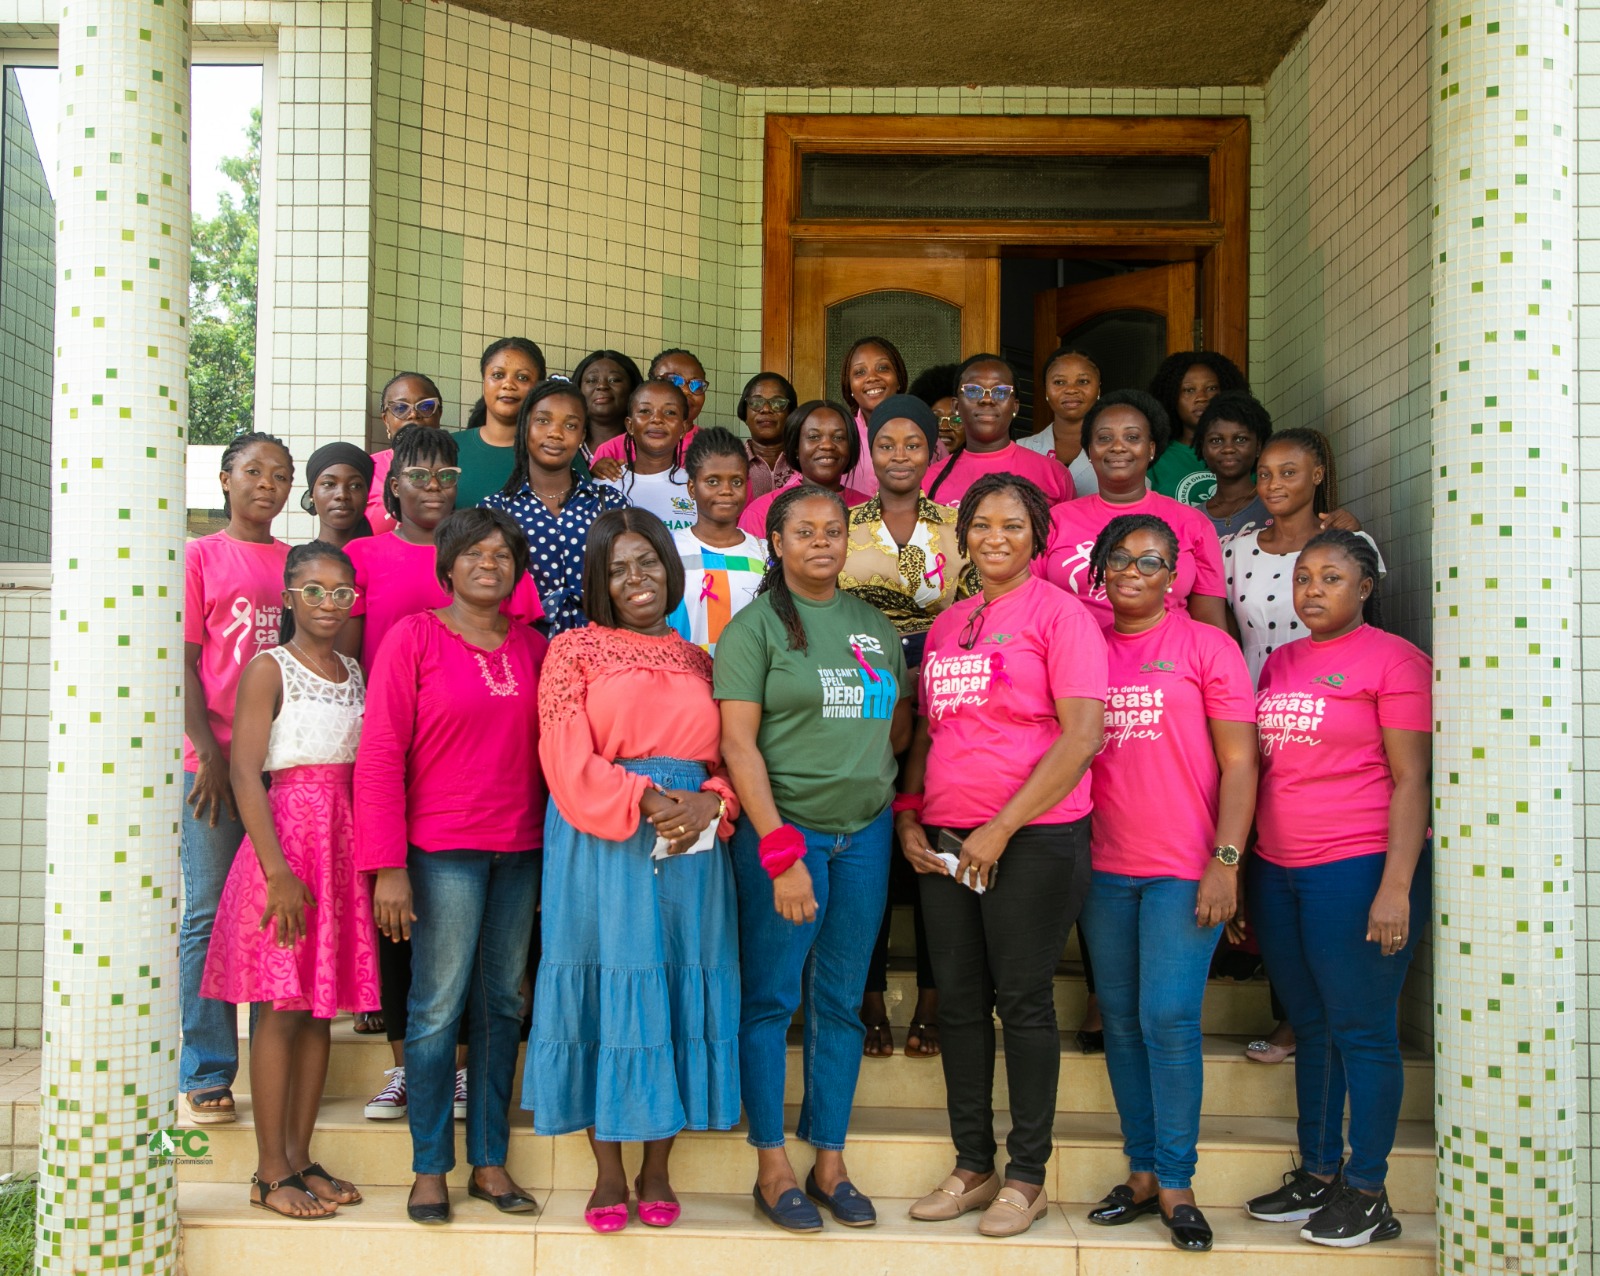 FCLA AND HRD OBSERVE BREAST CANCER MONTH